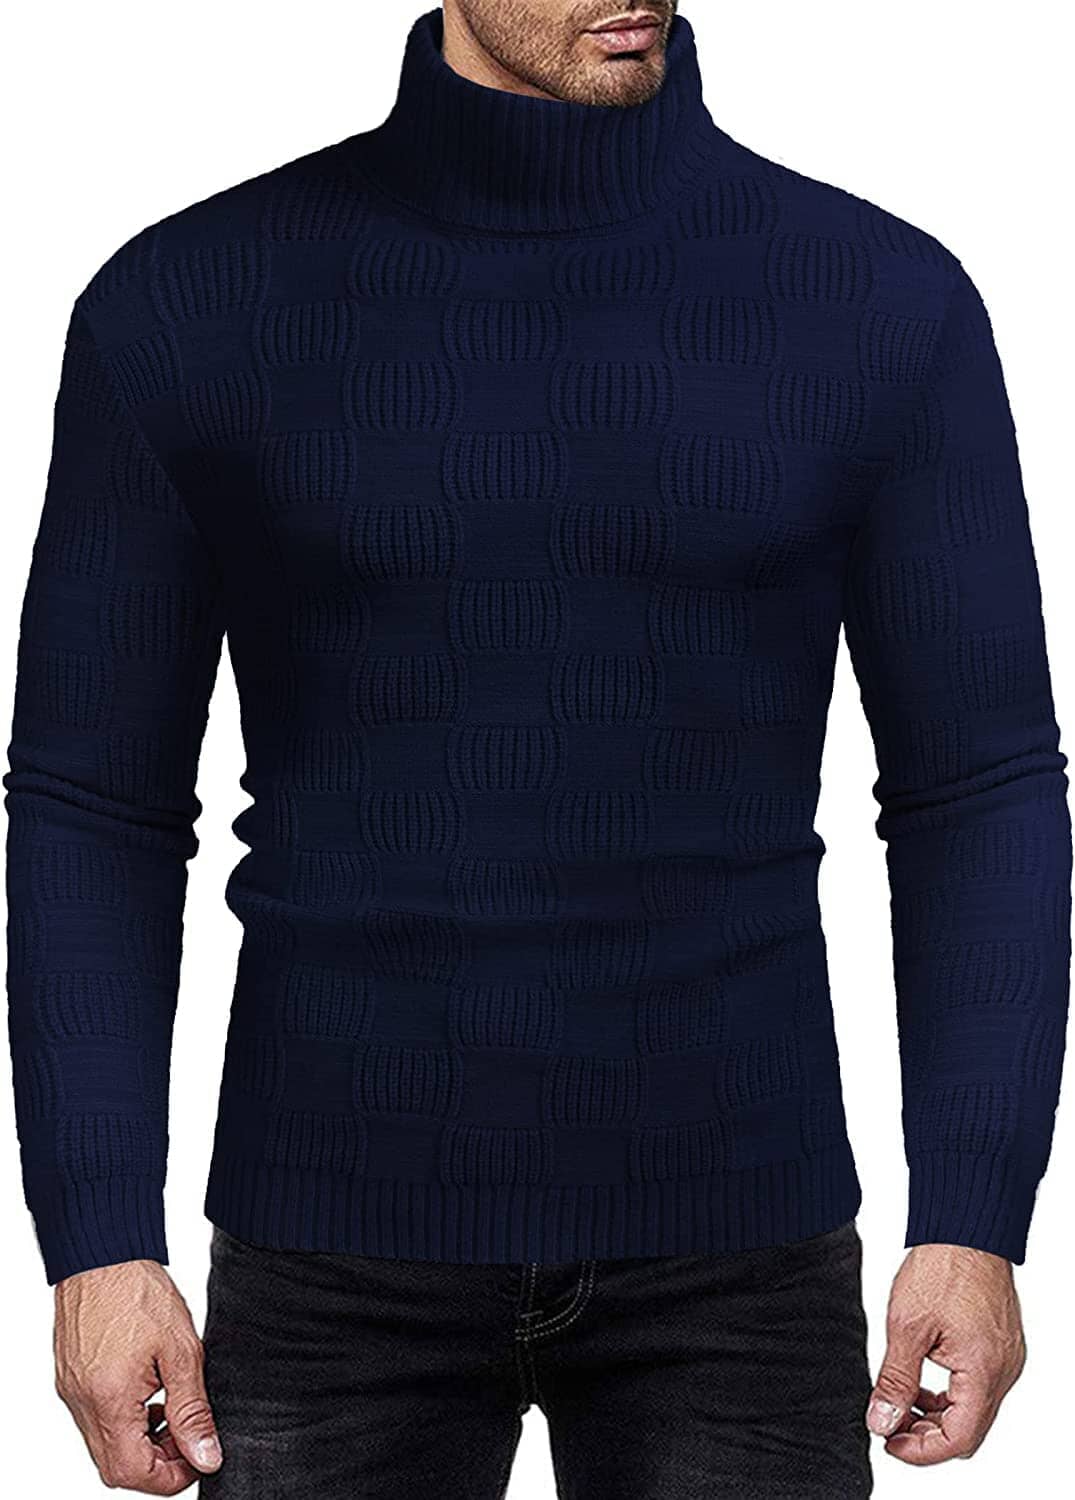 Men's Knitted Turtleneck Sweater Plaid Hightneck Long Sleeve Sweater (US Only) Sweaters COOFANDY Store Navy Blue S 